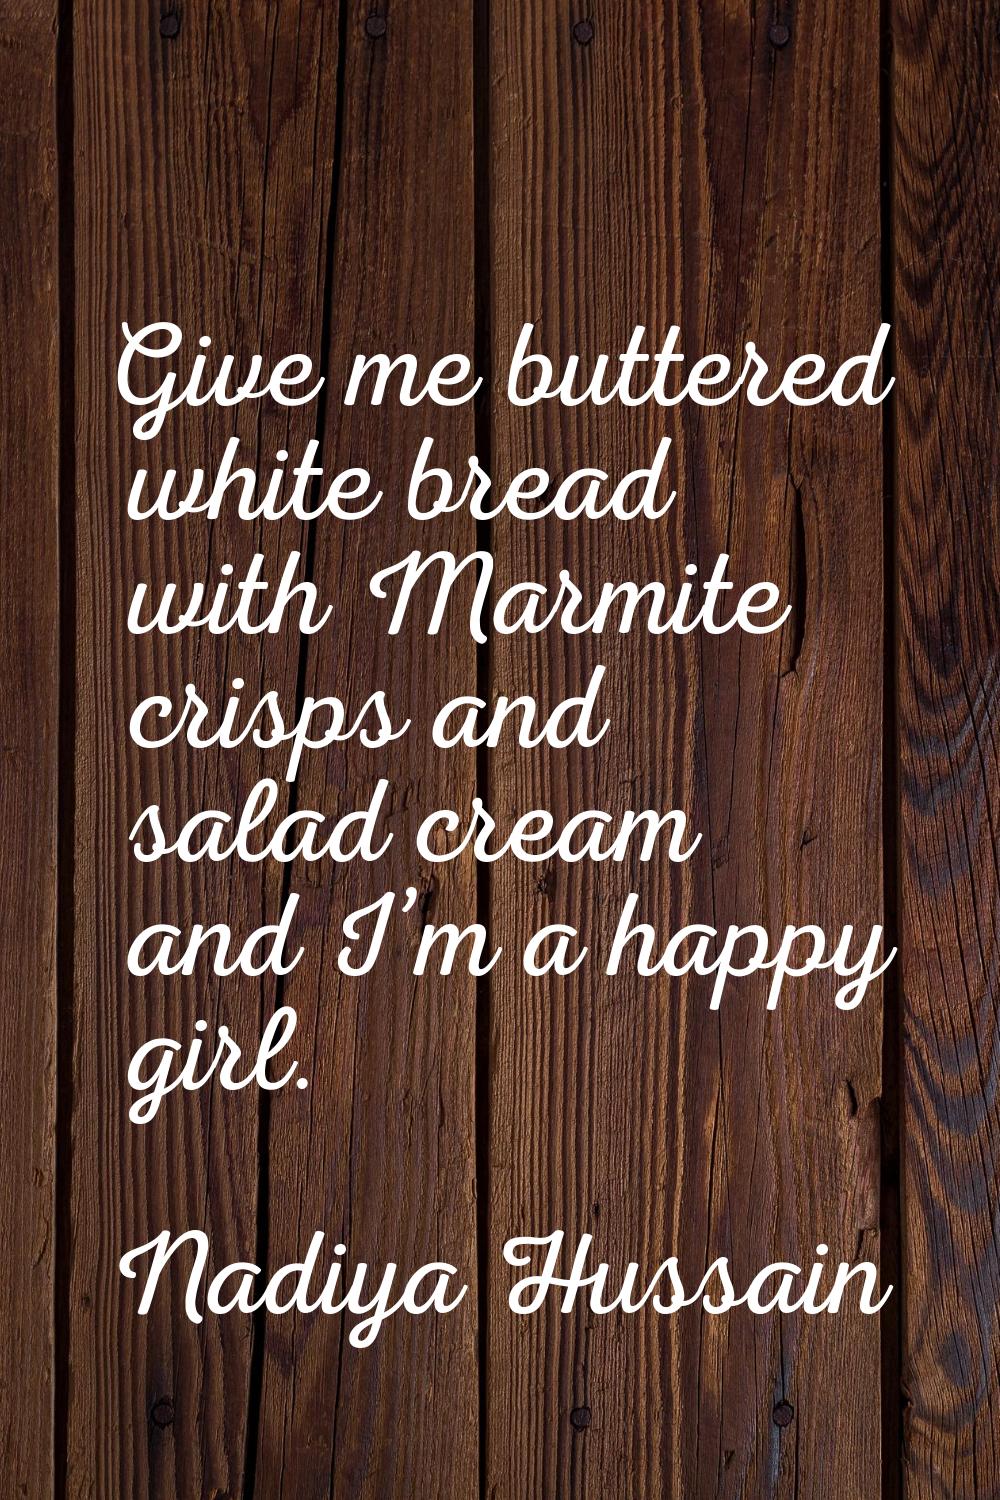 Give me buttered white bread with Marmite crisps and salad cream and I’m a happy girl.